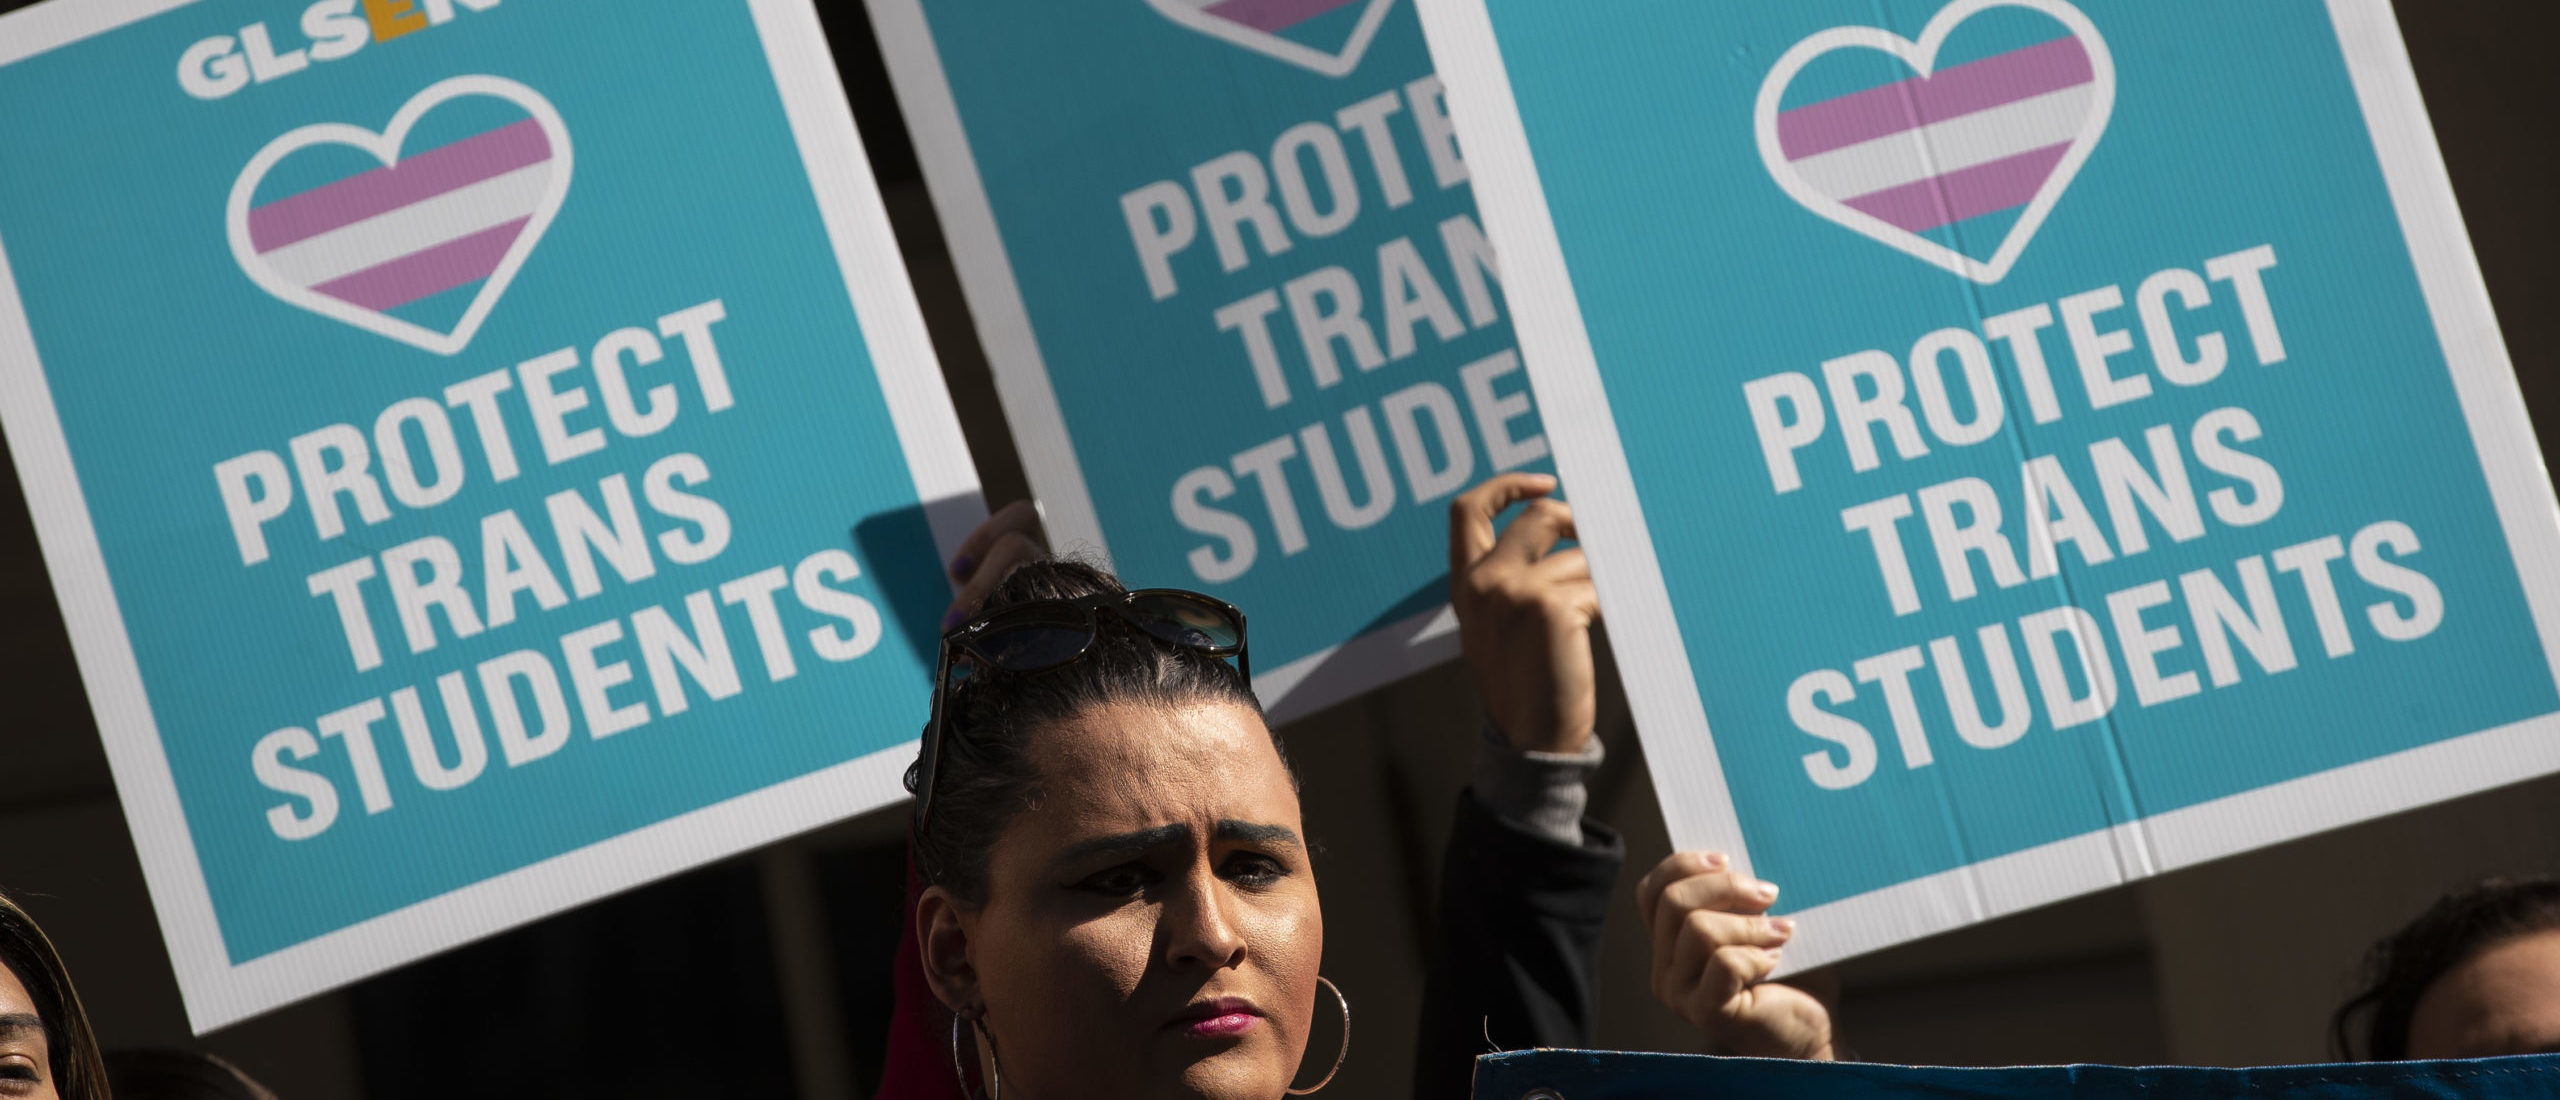 L.G.B.T. activists and their supporters rally in support of transgender people